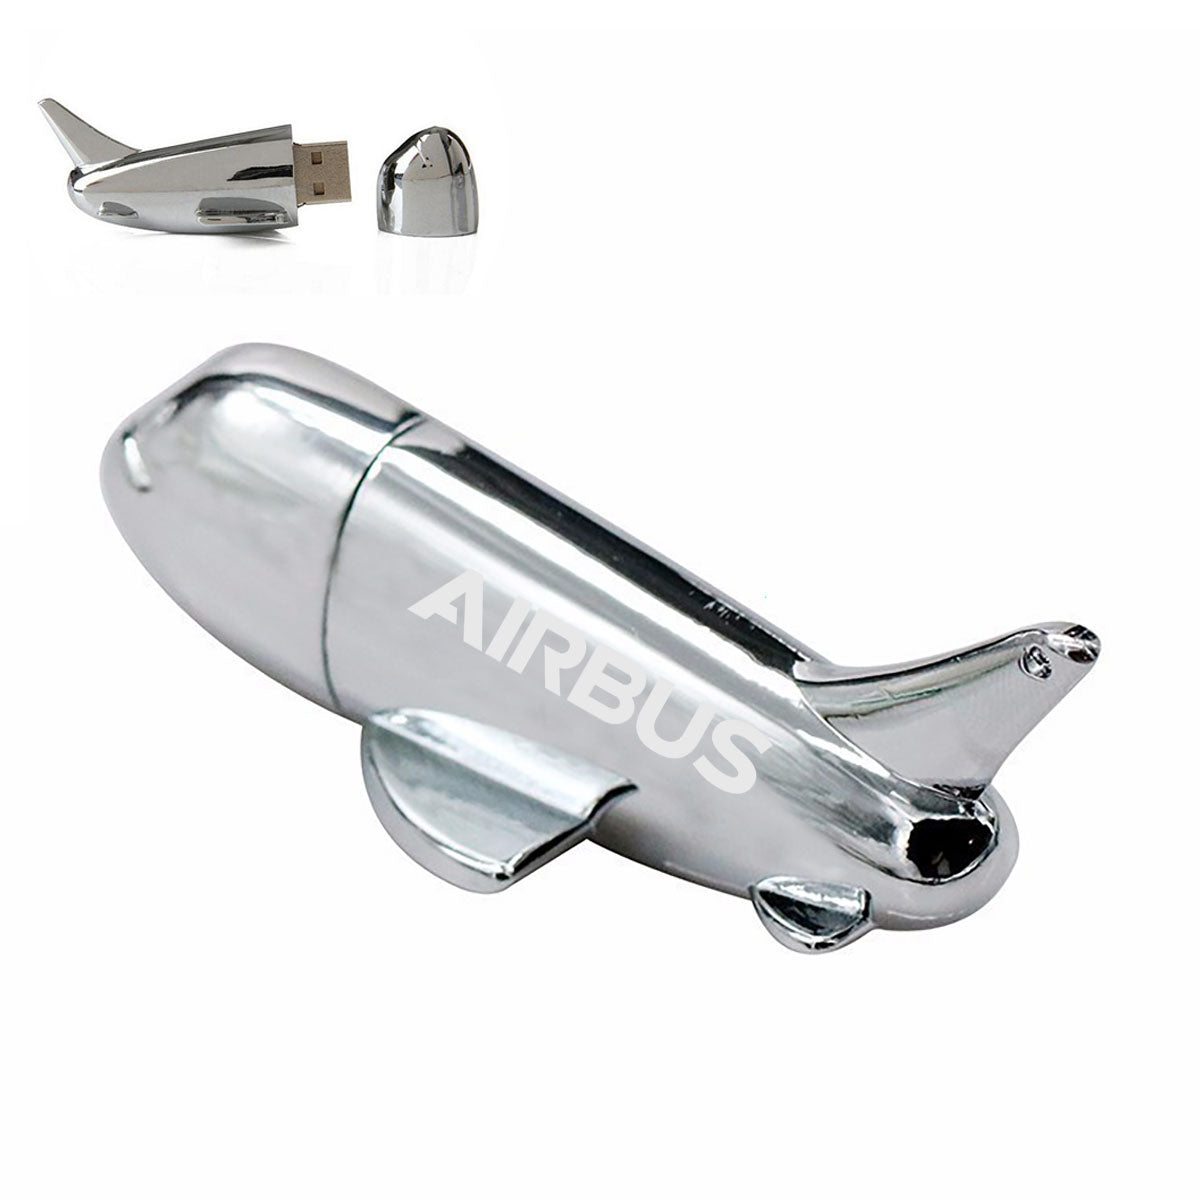 Airbus & Text Designed Airplane Shape USB Drives